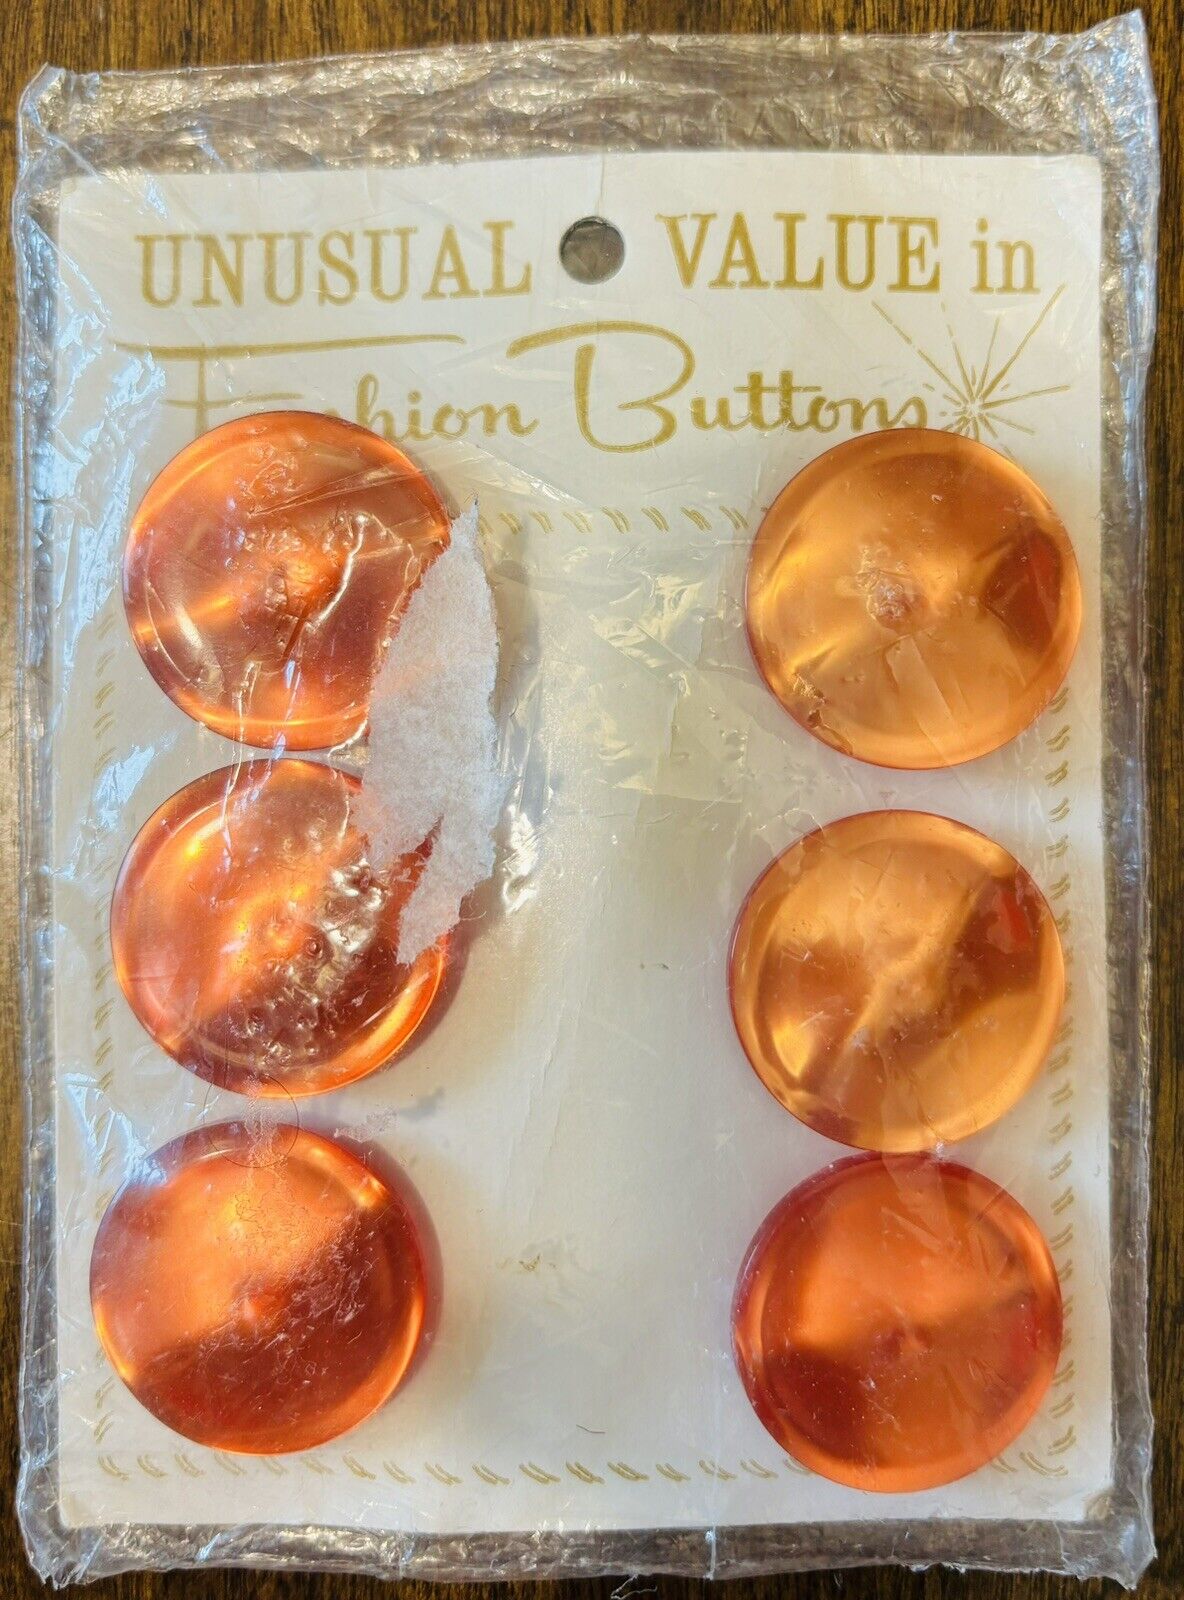 Vintage Unusual Value in Fashion Buttons 6 Large Orange Buttons - 1\